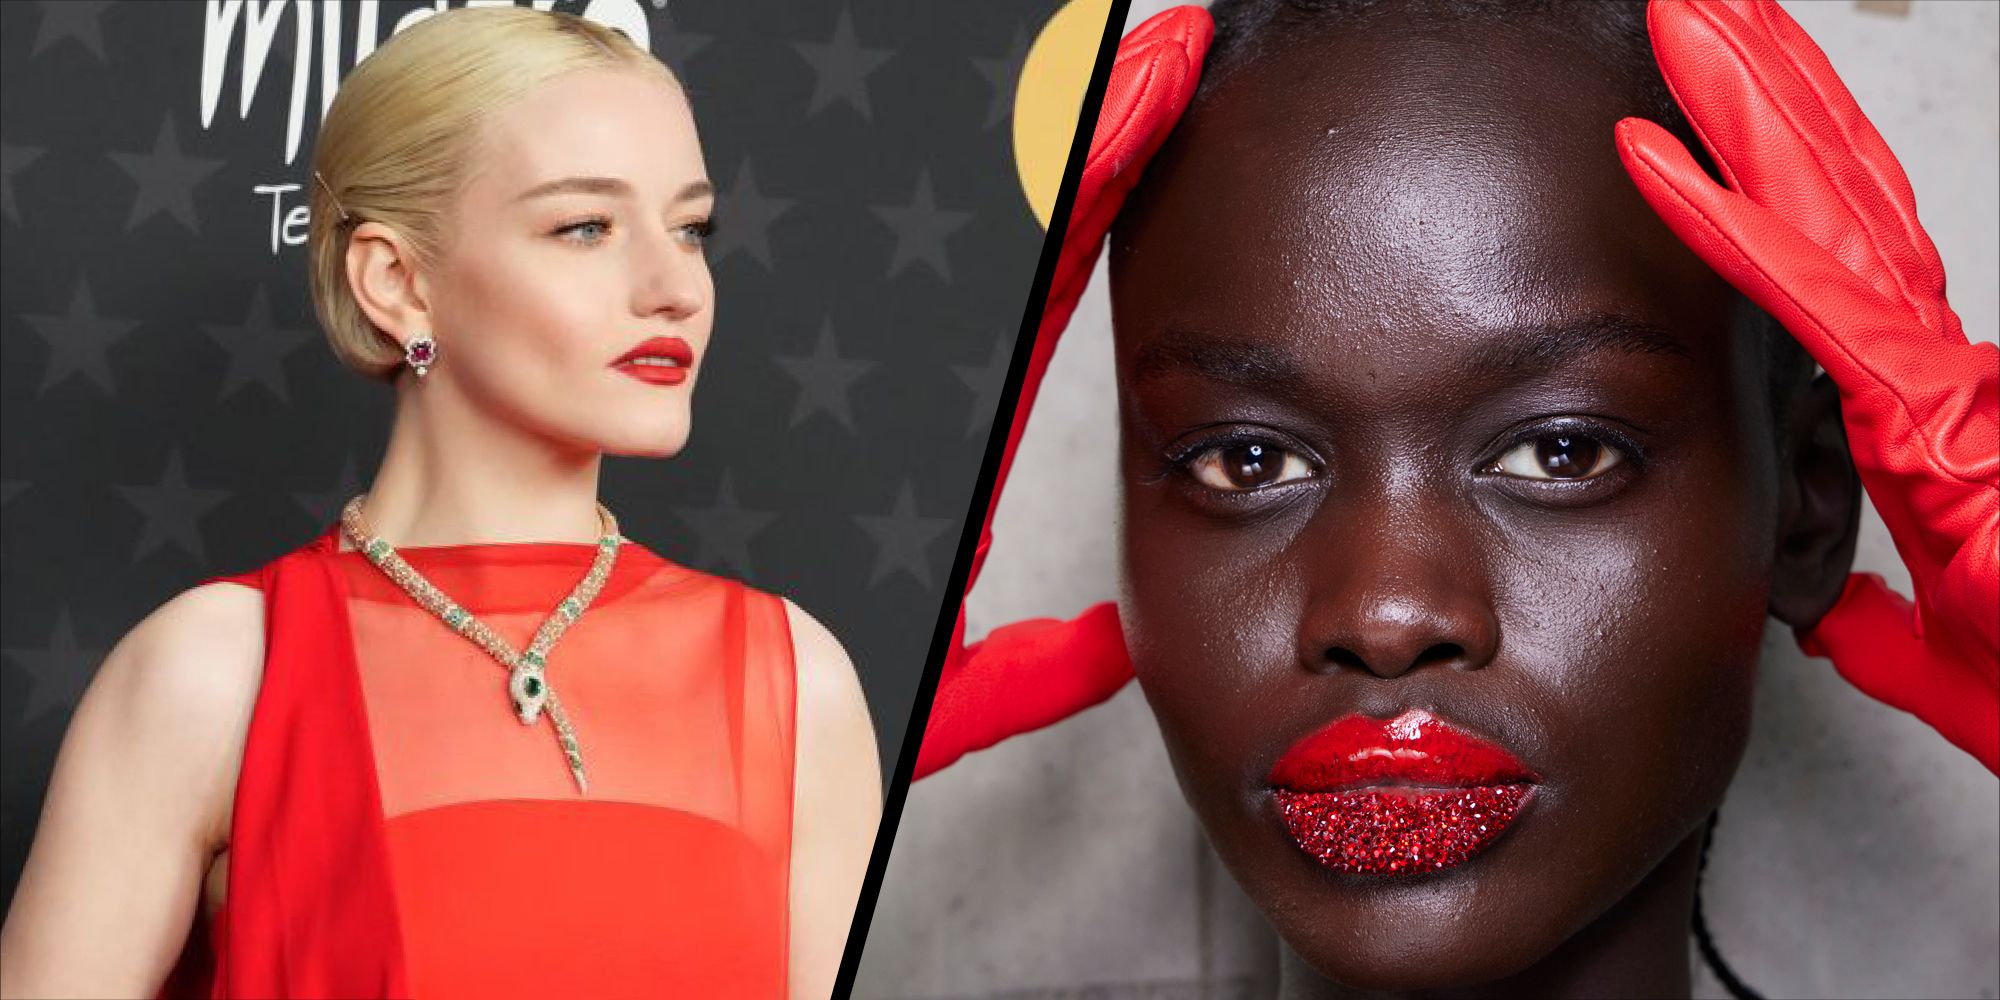 Red Lipstick Shades: How To Find The Perfect Match For Your Skin